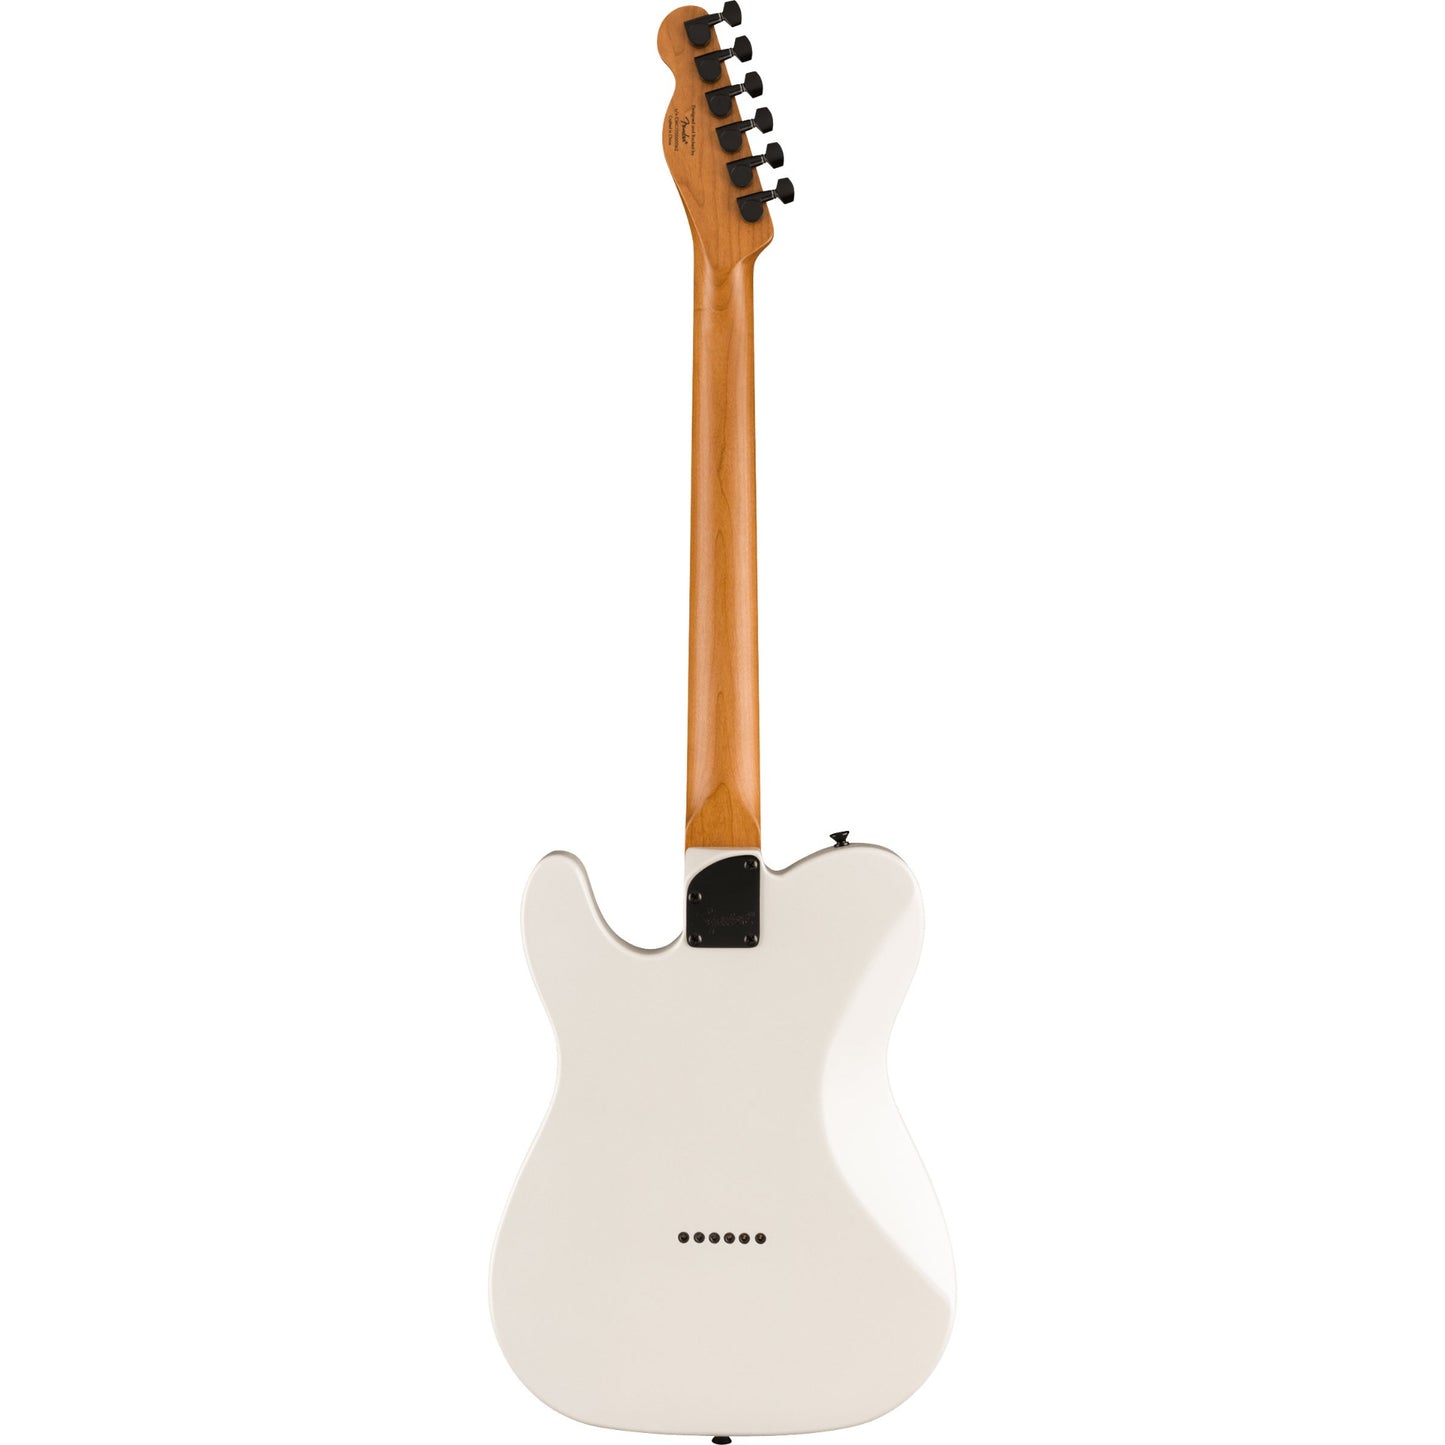 Squier Contemporary Telecaster Electric Guitar in Pearl White